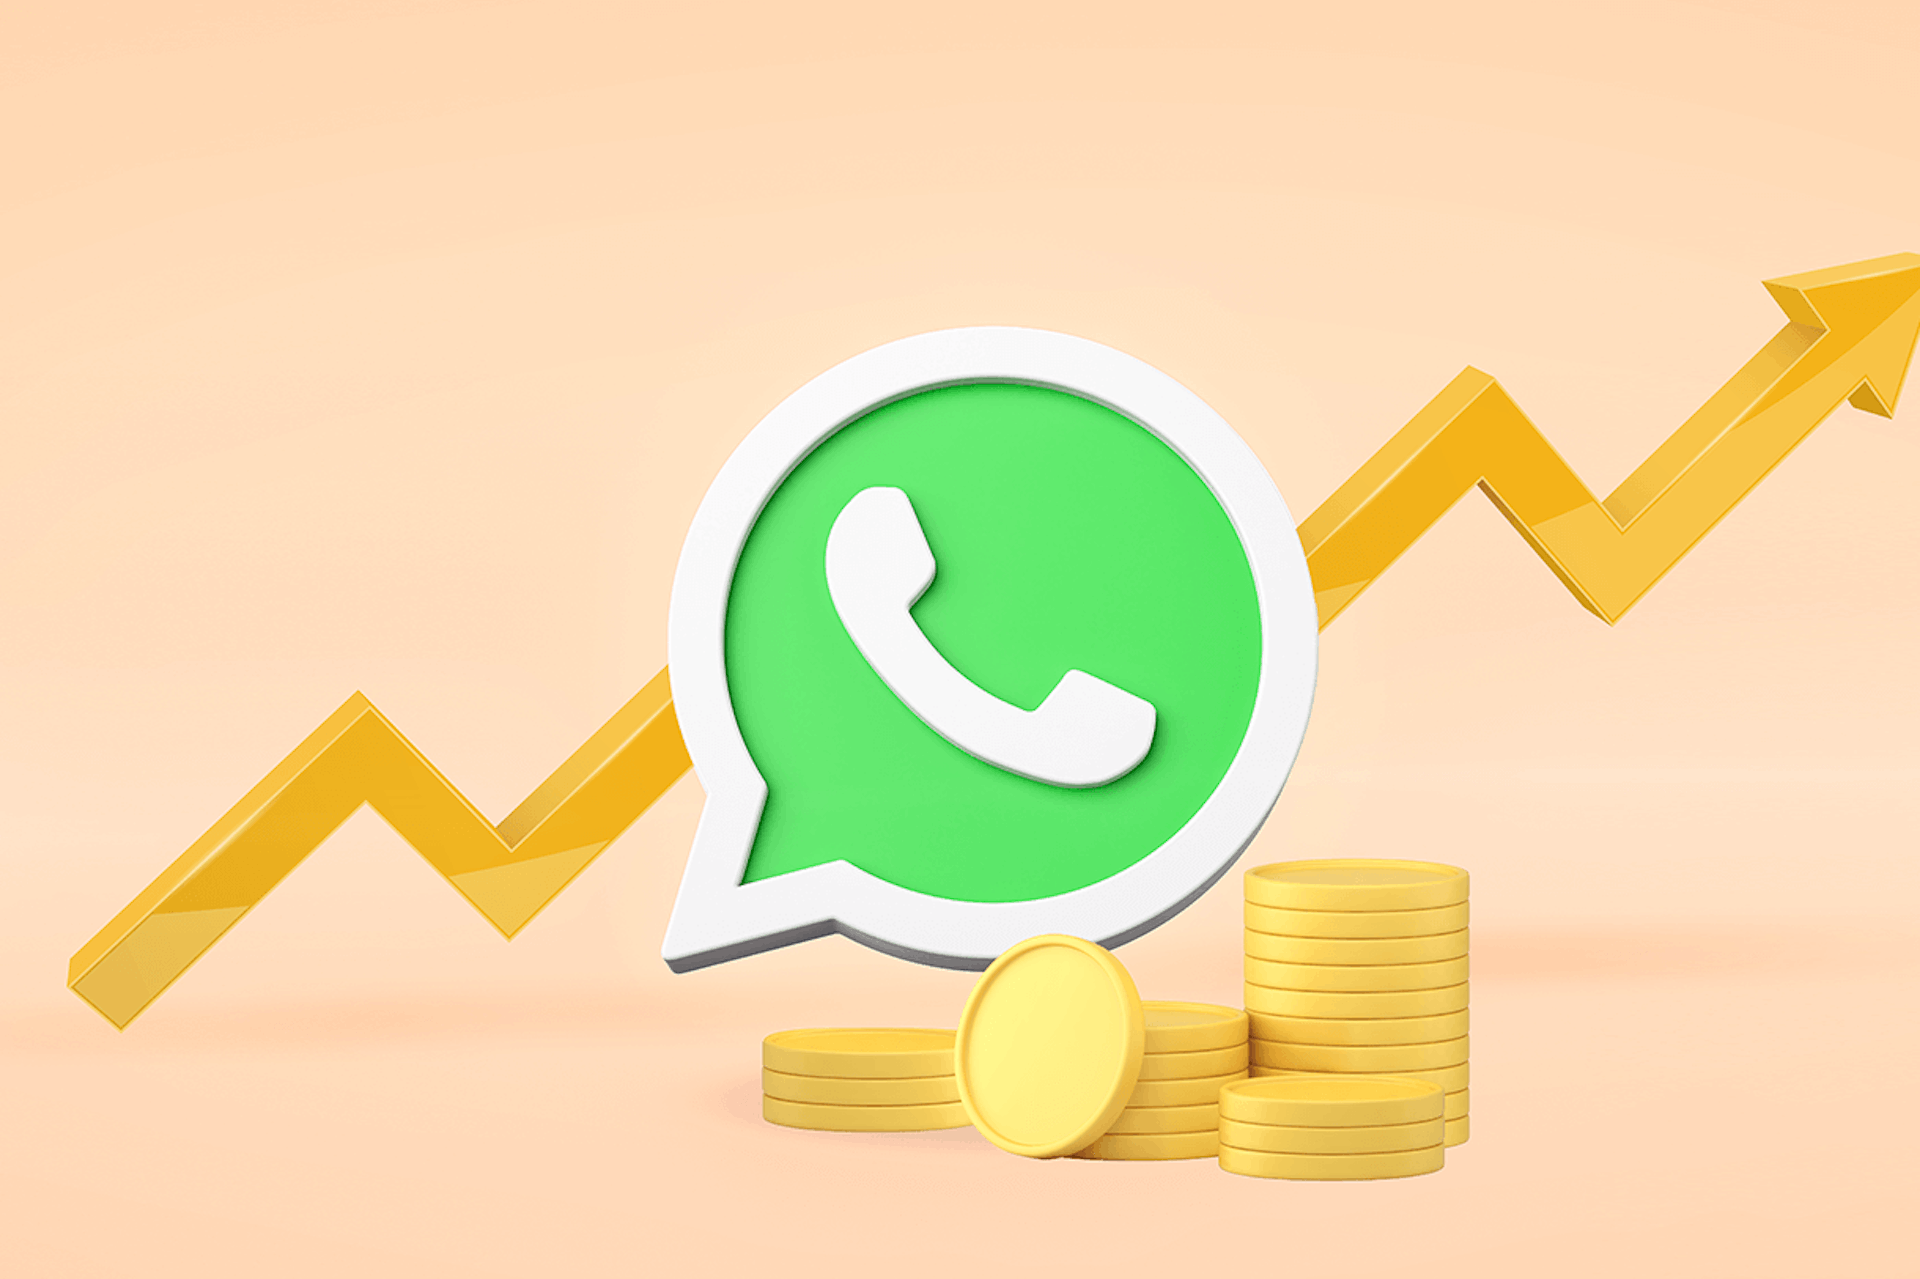 An illustration of the WhatsApp logo, coins, and an upwards trend line, representing using WhatsApp for business.